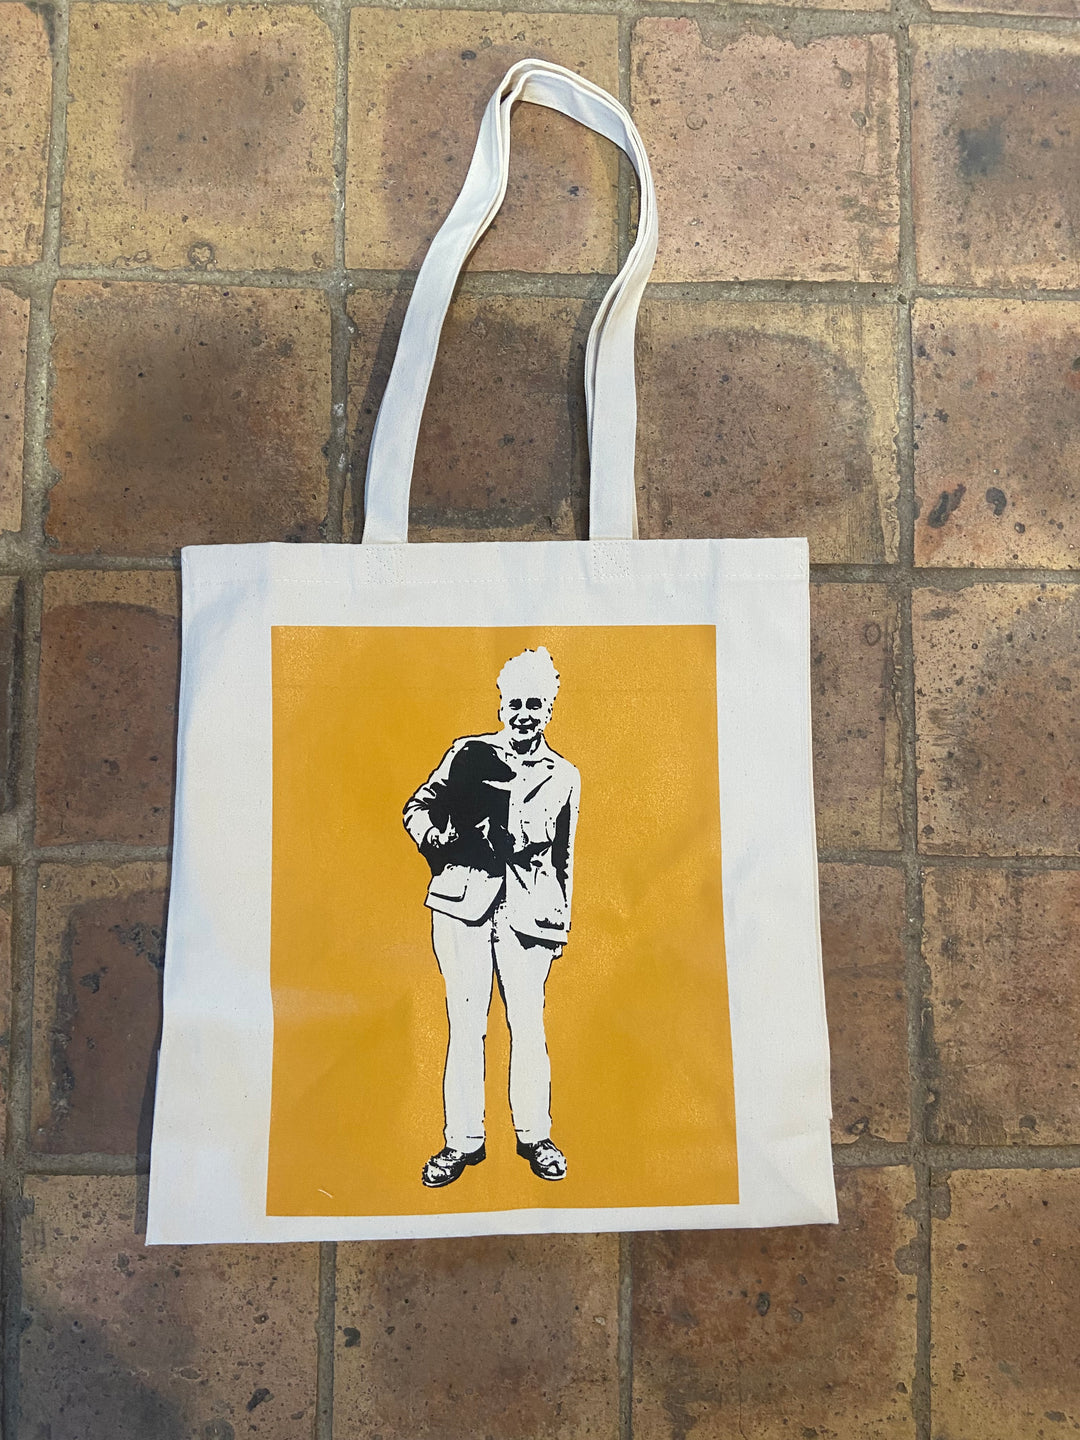 The Christopher Lloyd Tote Bag